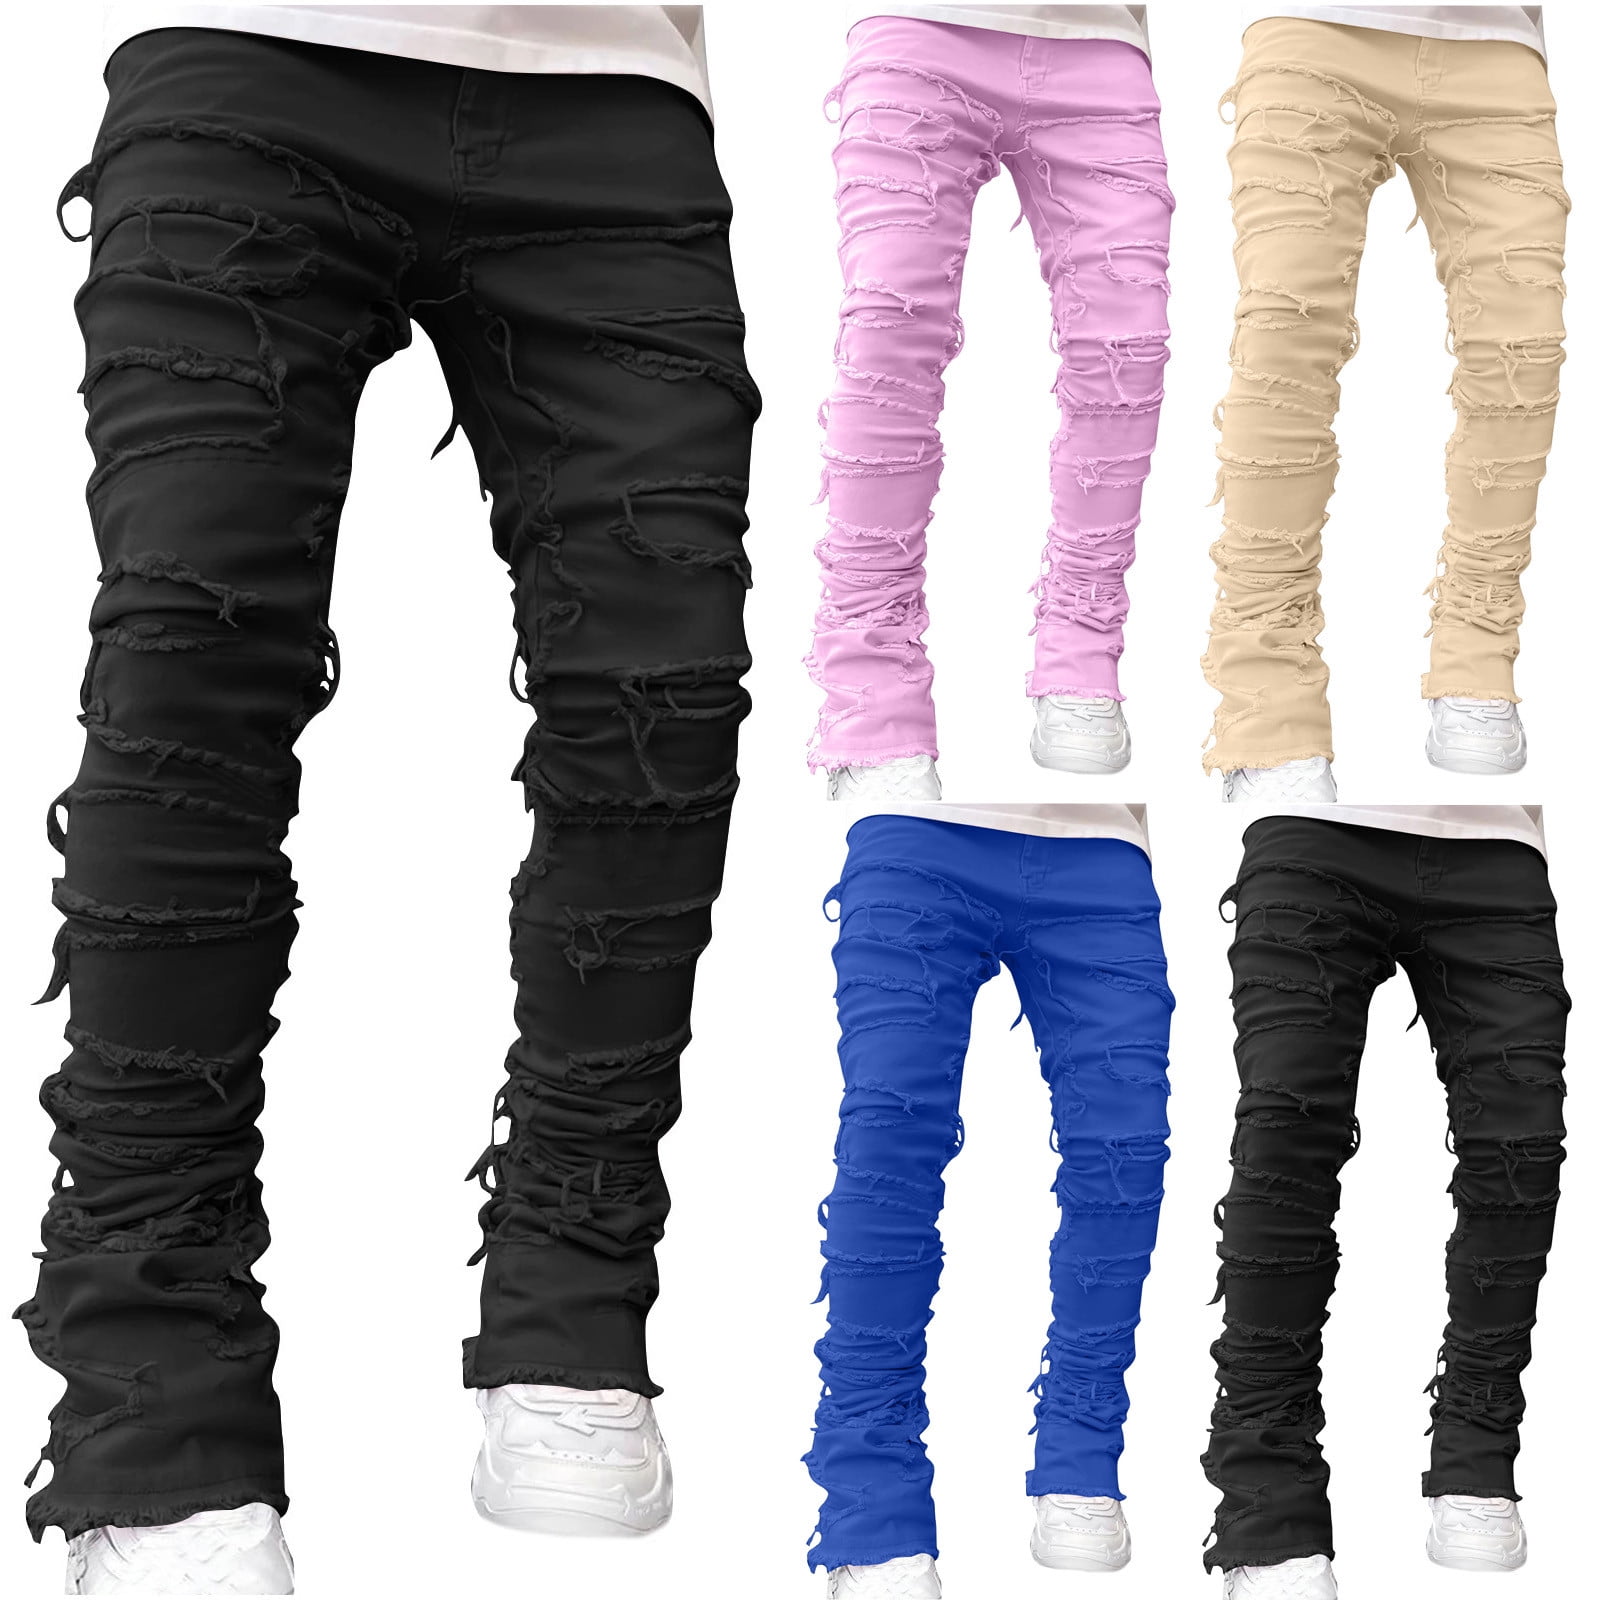 APEXFWDT Men's Skinny Slim Fit Jeans Straight Ripped Destroyed Distressed  Denim Pants Stretch Knee Patch Denim Pants Jeans